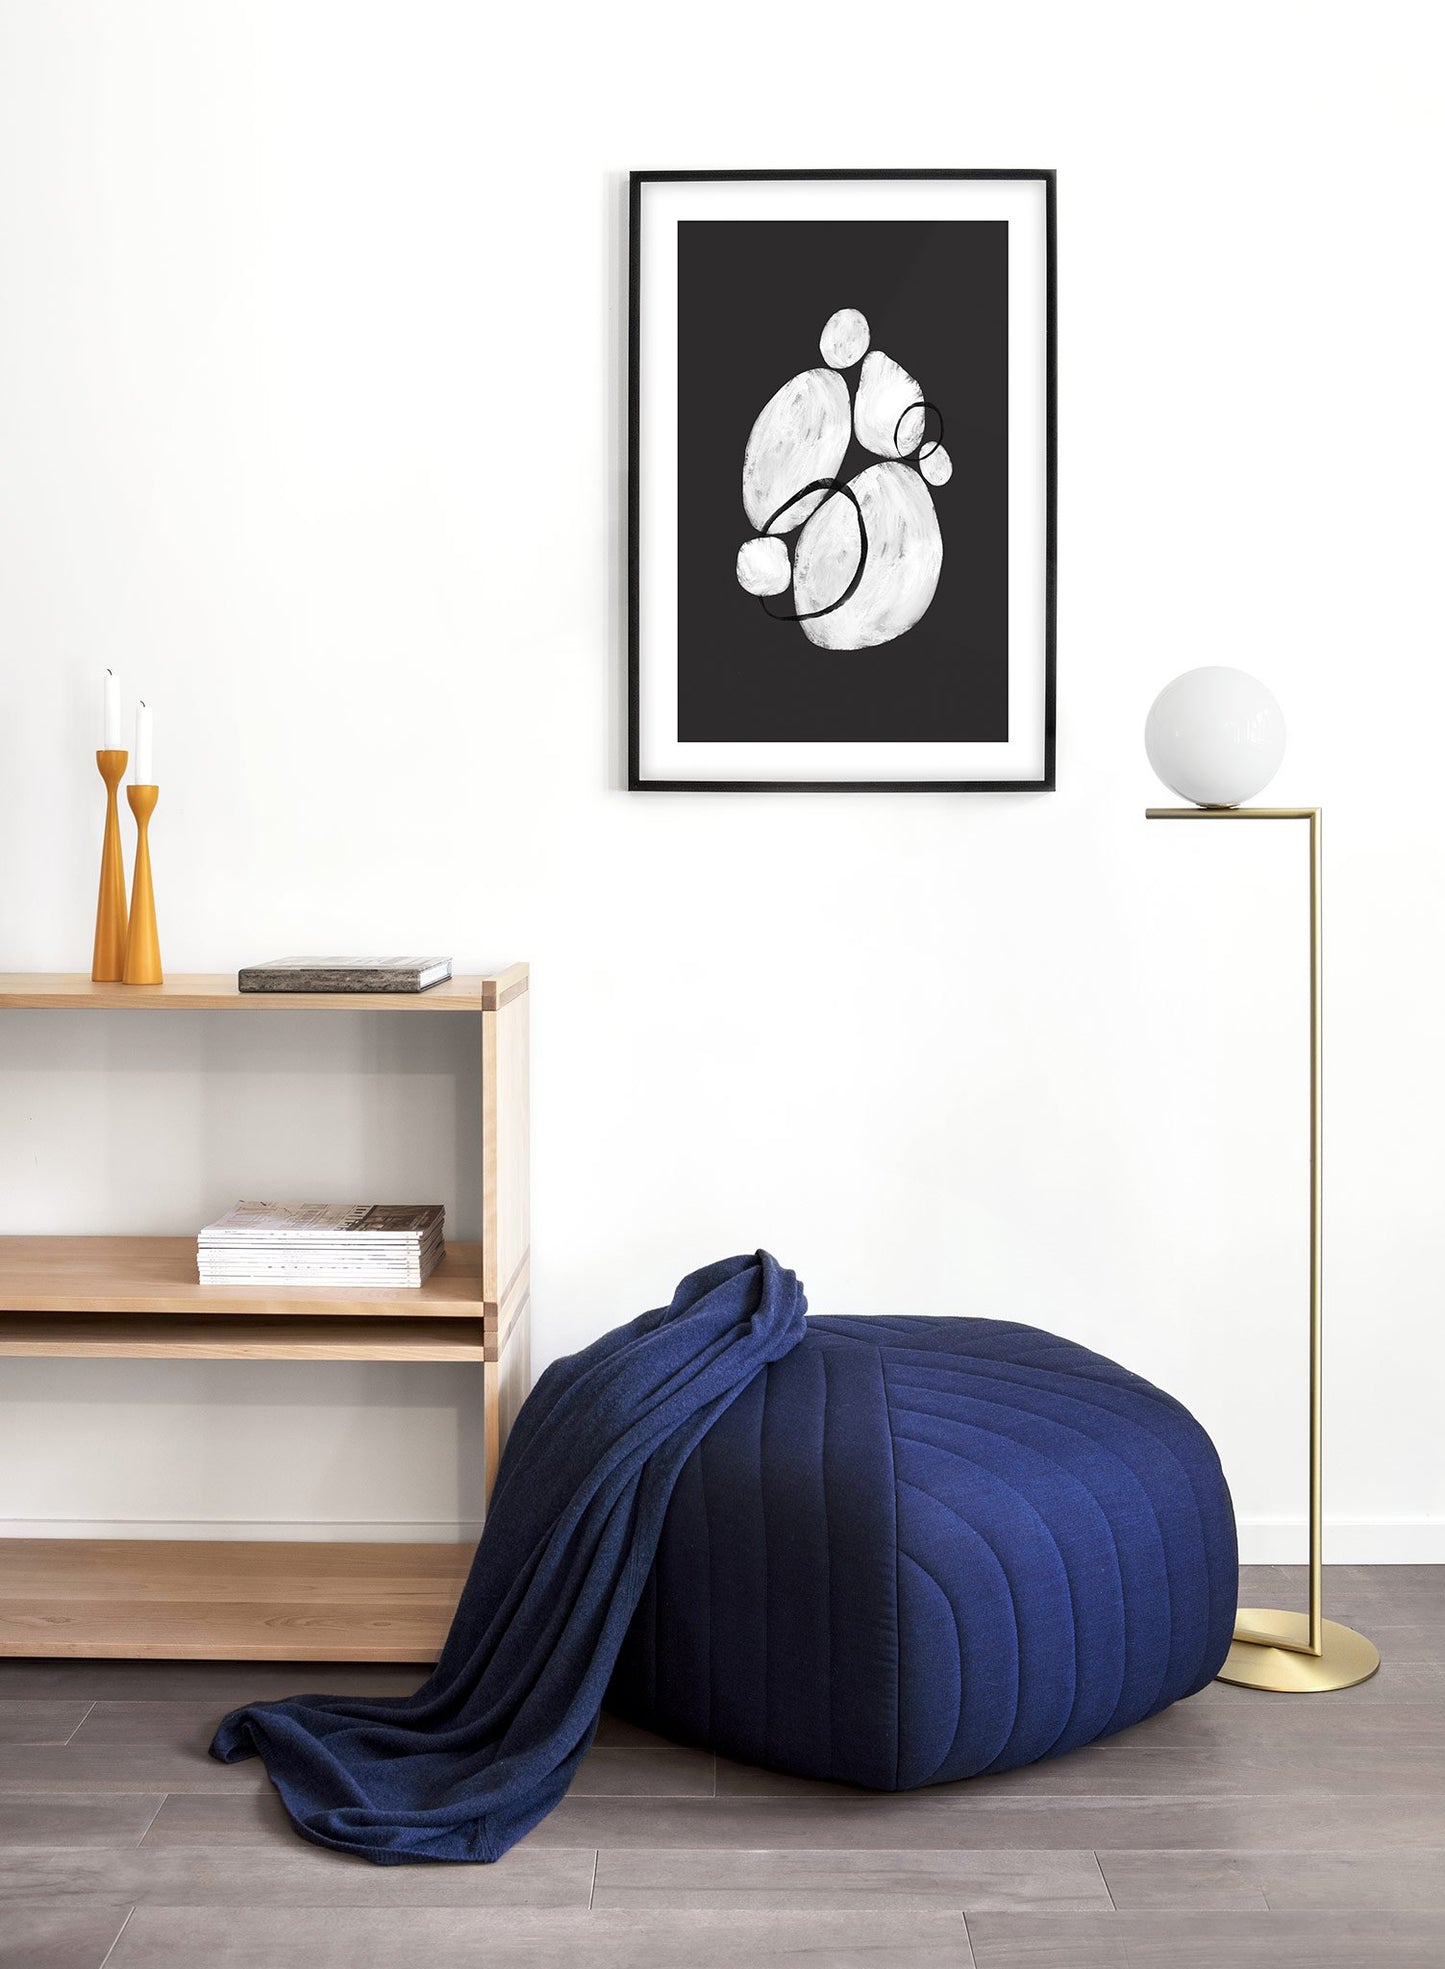 Modern minimalist poster by Opposite Wall with graphic illustration of pebbles - Lifestyle - Living Room